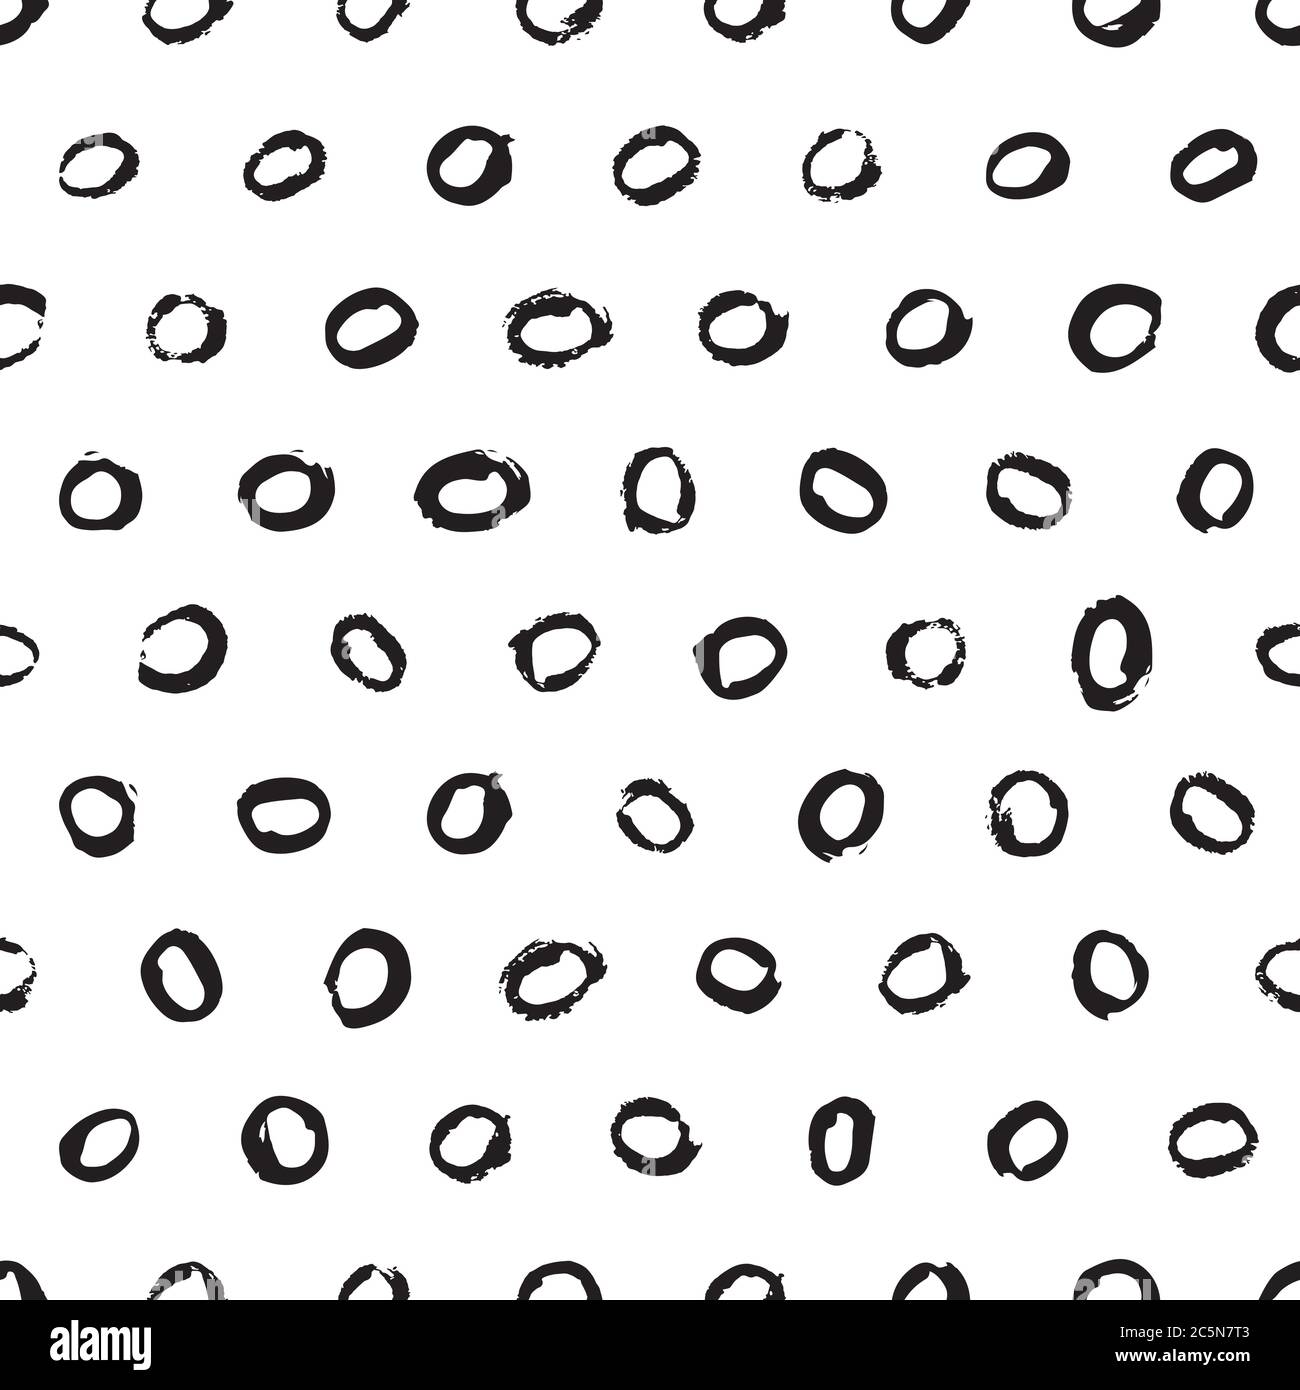 Watercolor or ink abstract black white stains seamless pattern. Polka dot circle grunge texture background. Hand drawn fabric design, fashion textile Stock Vector